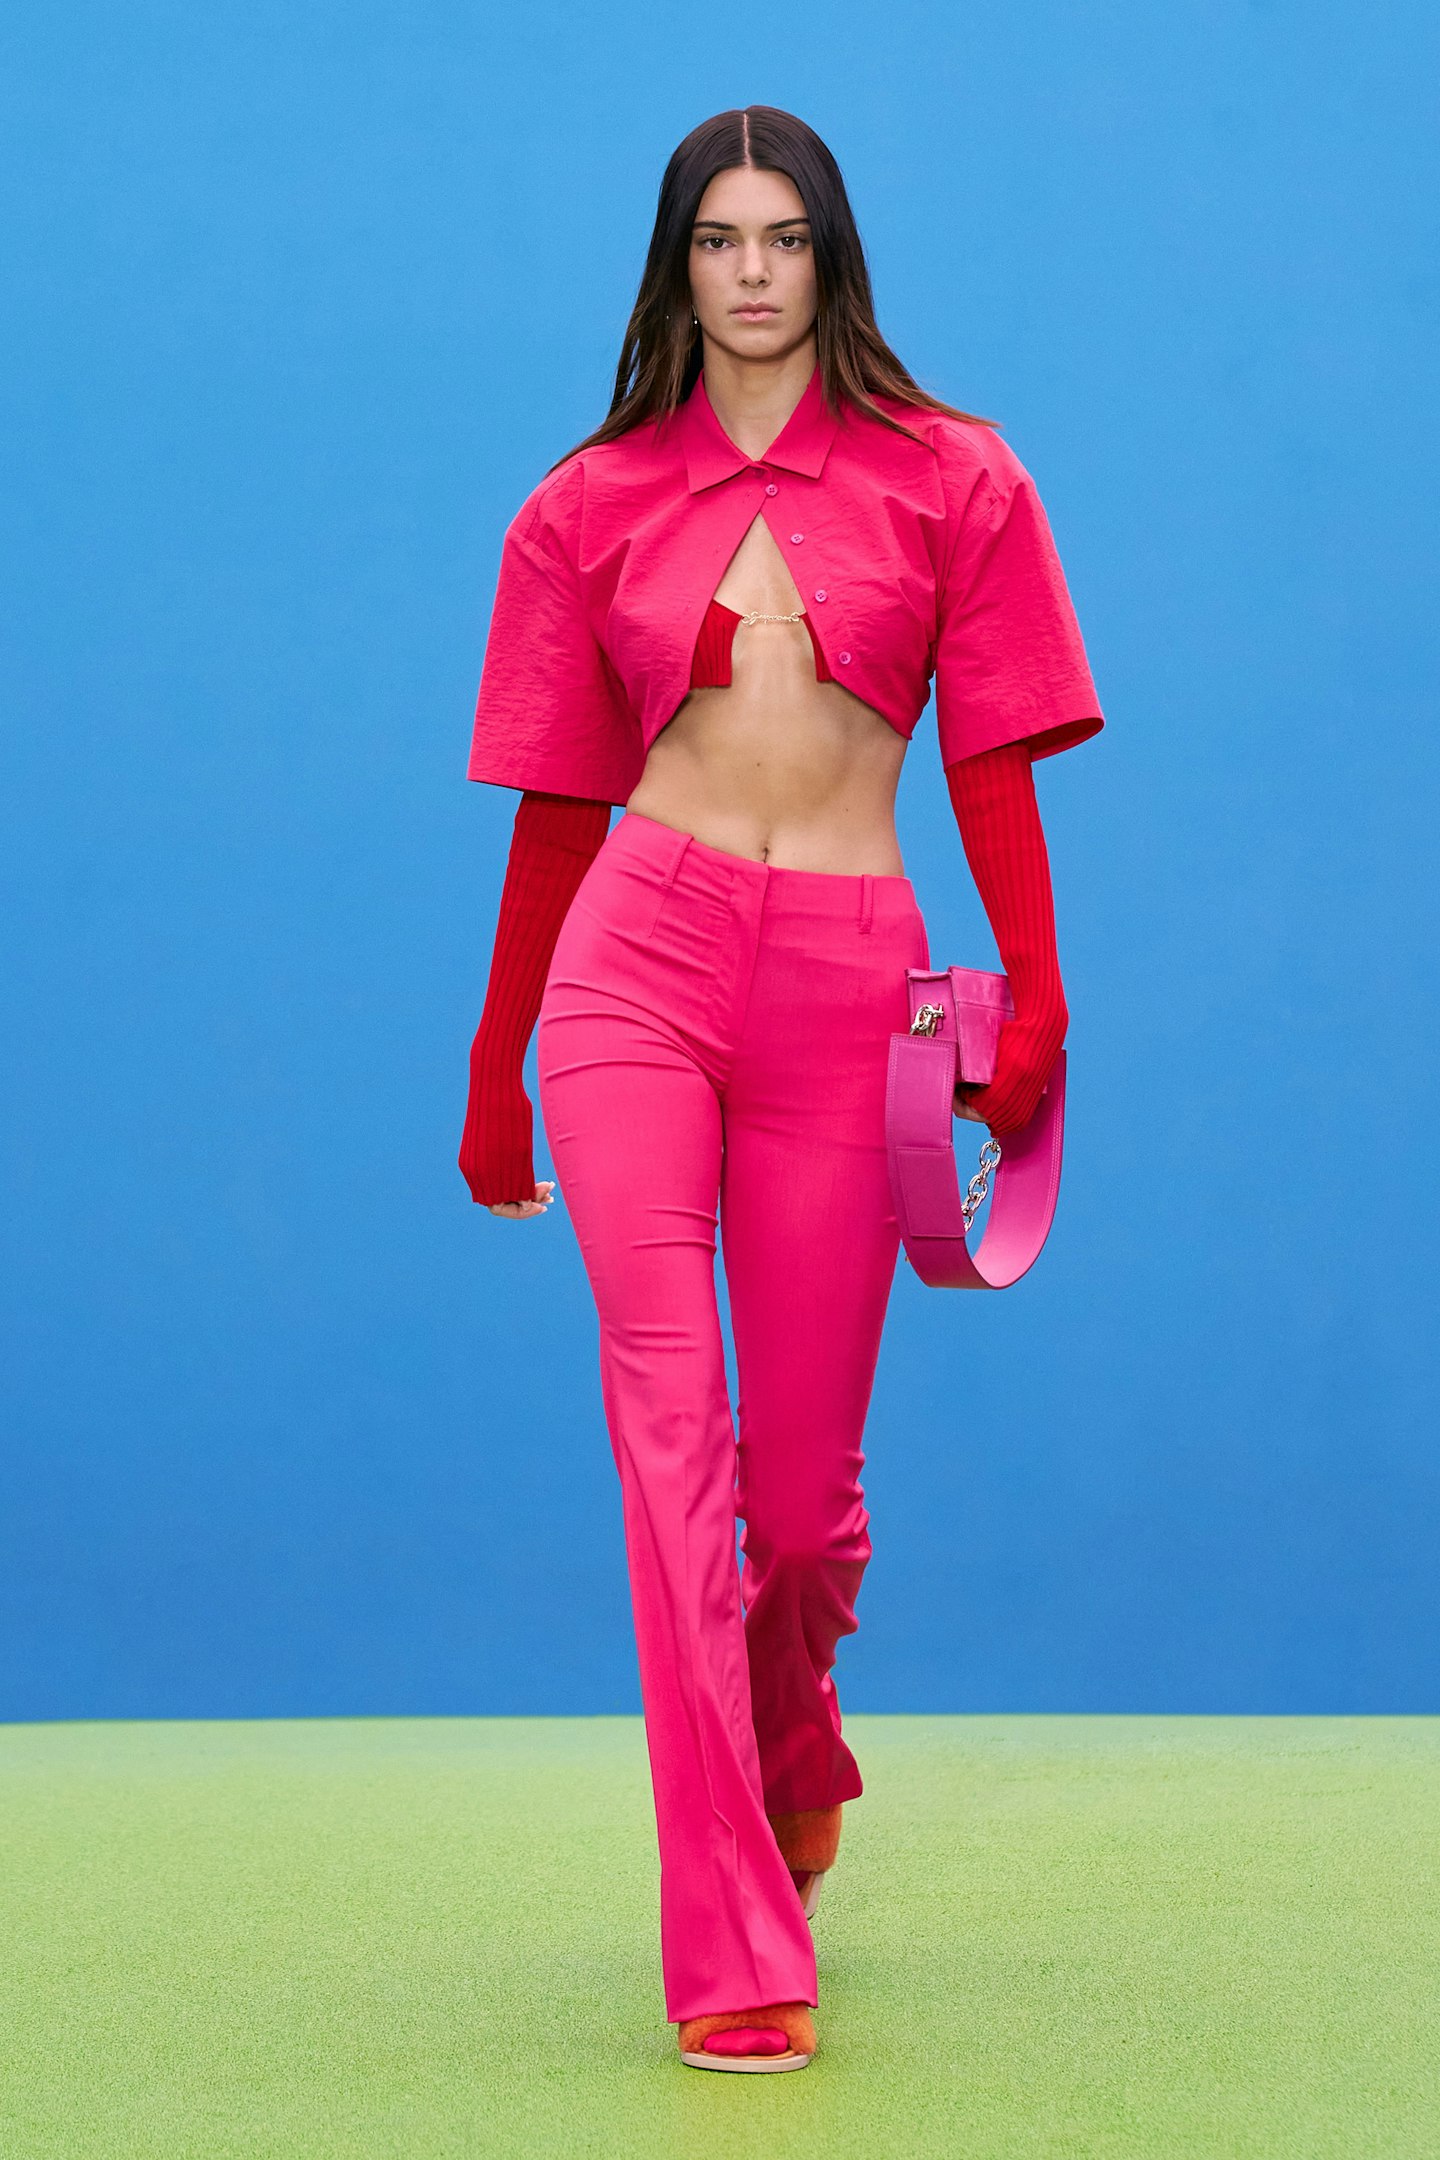 Kendall Jenner wearing an all-pink outfit at Jacquemus 